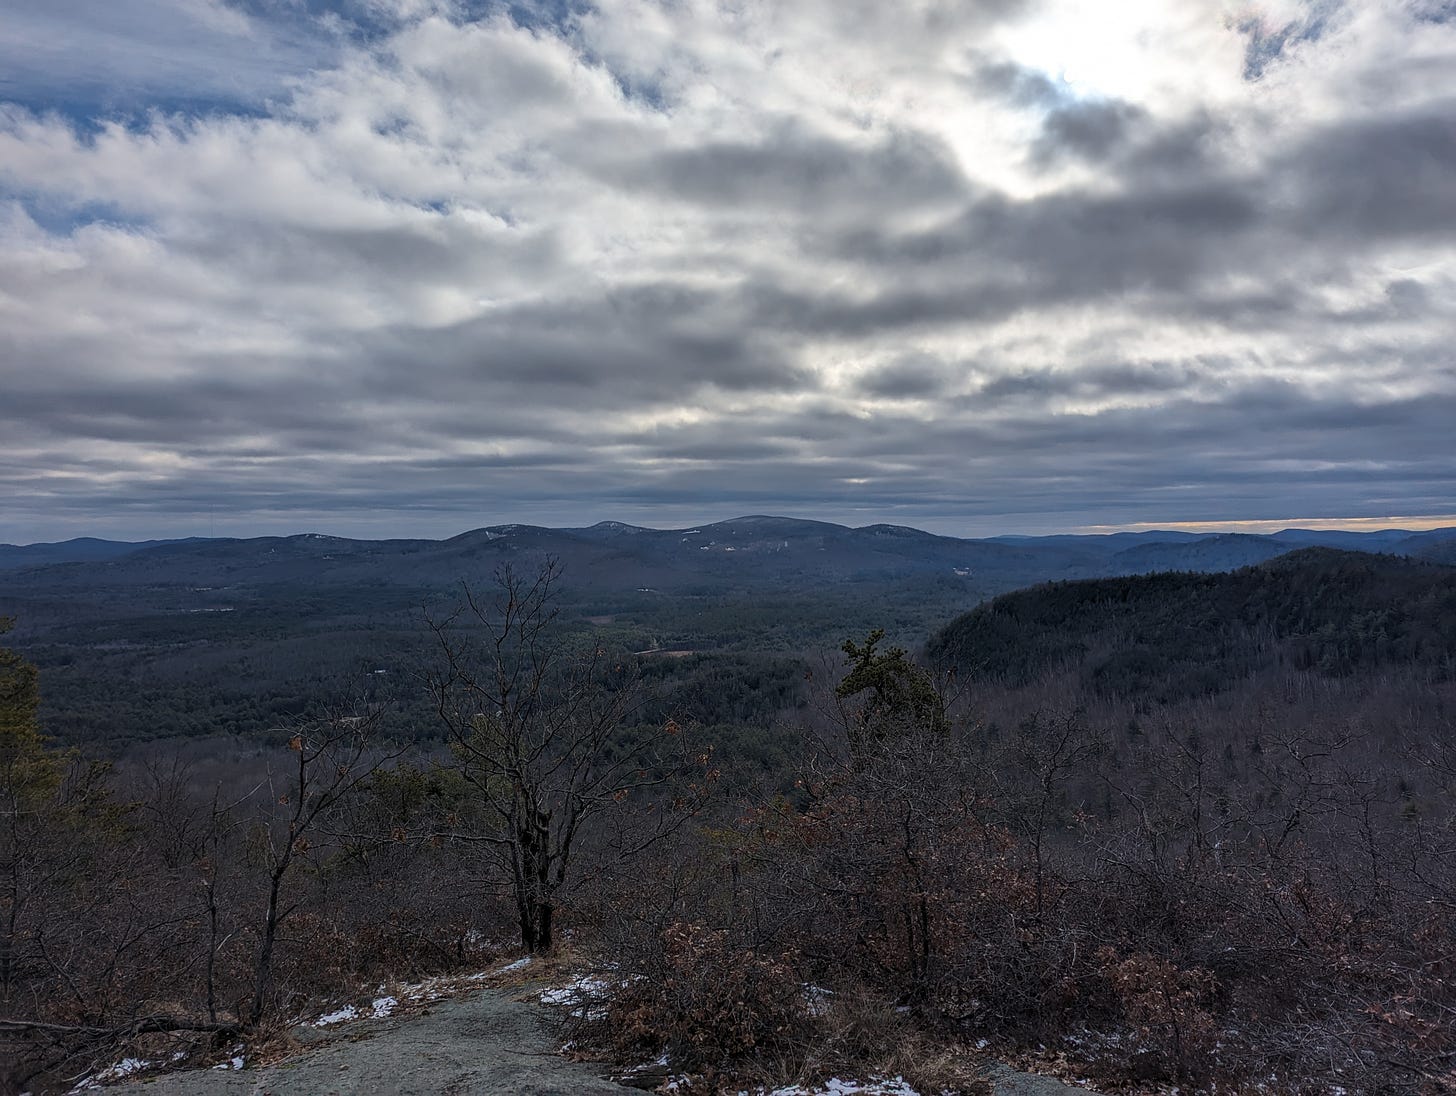 A photo from a scenic overlook, showing heavy clouds, low mountains, and traces of snow on the ground. The sky is heavily overcast.